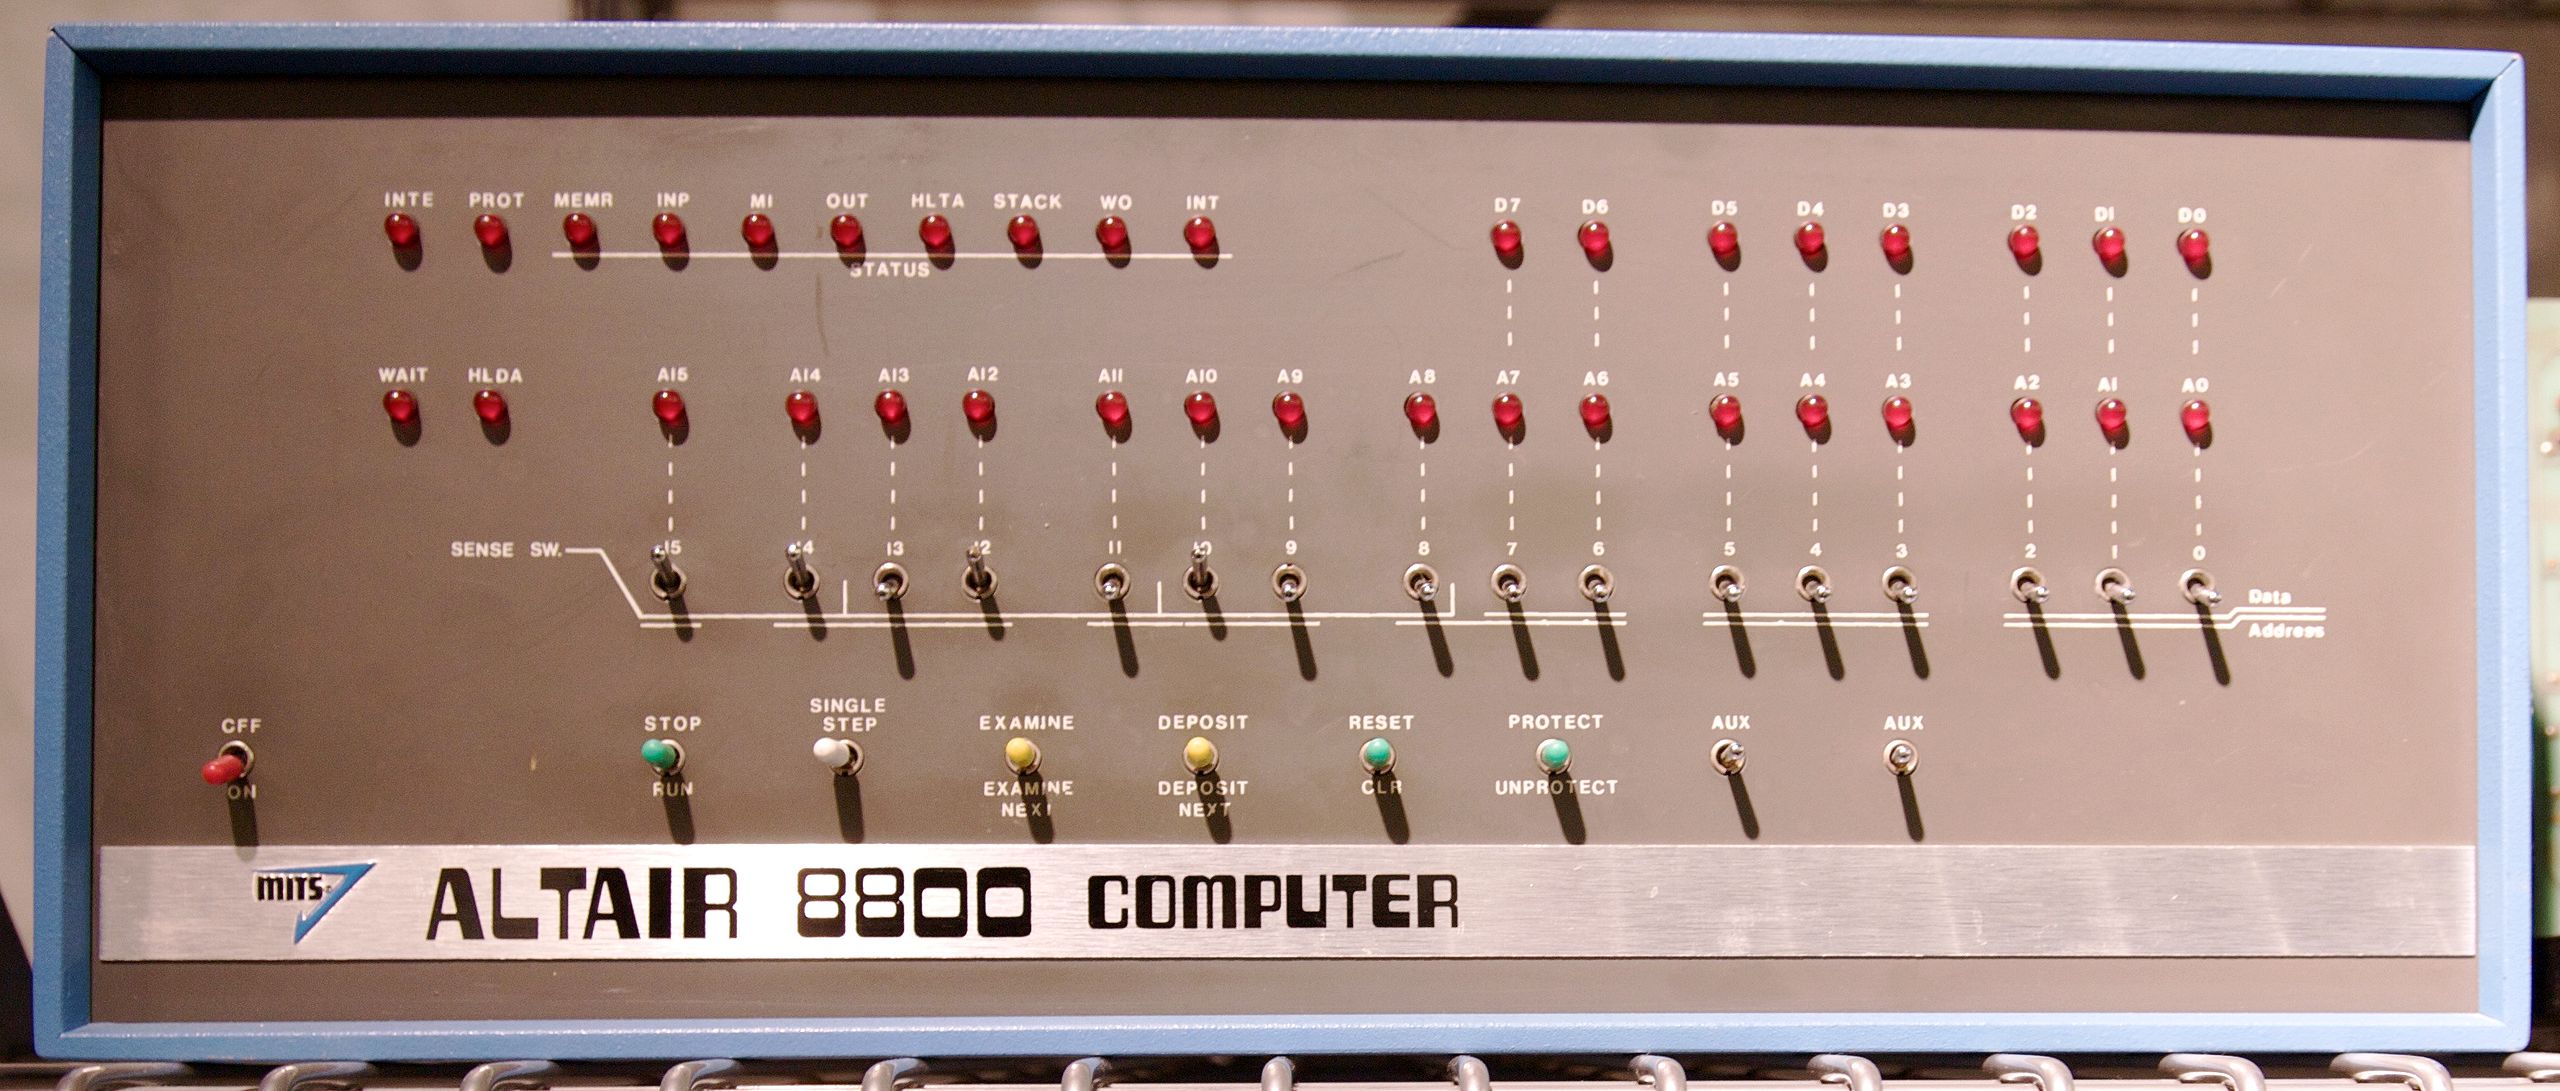 Image of an Altair computer from https://en.wikipedia.org/wiki/Altair_8800#/media/File:Altair_8800_at_the_Computer_History_Museum,_cropped.jpg at the Computer History Museum